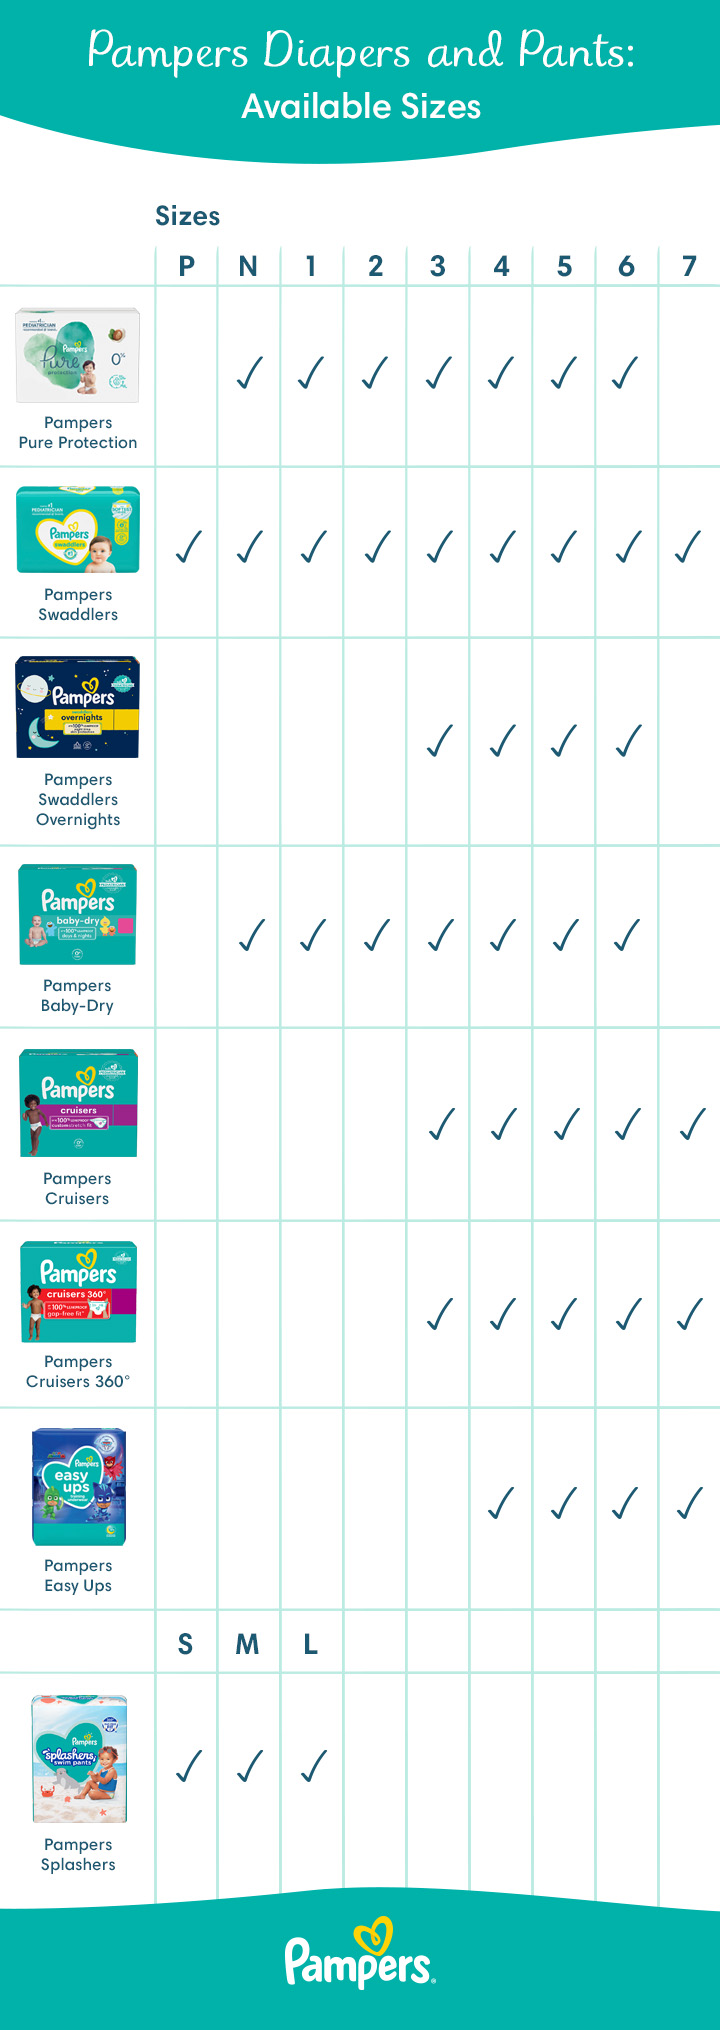 pampers size chart india